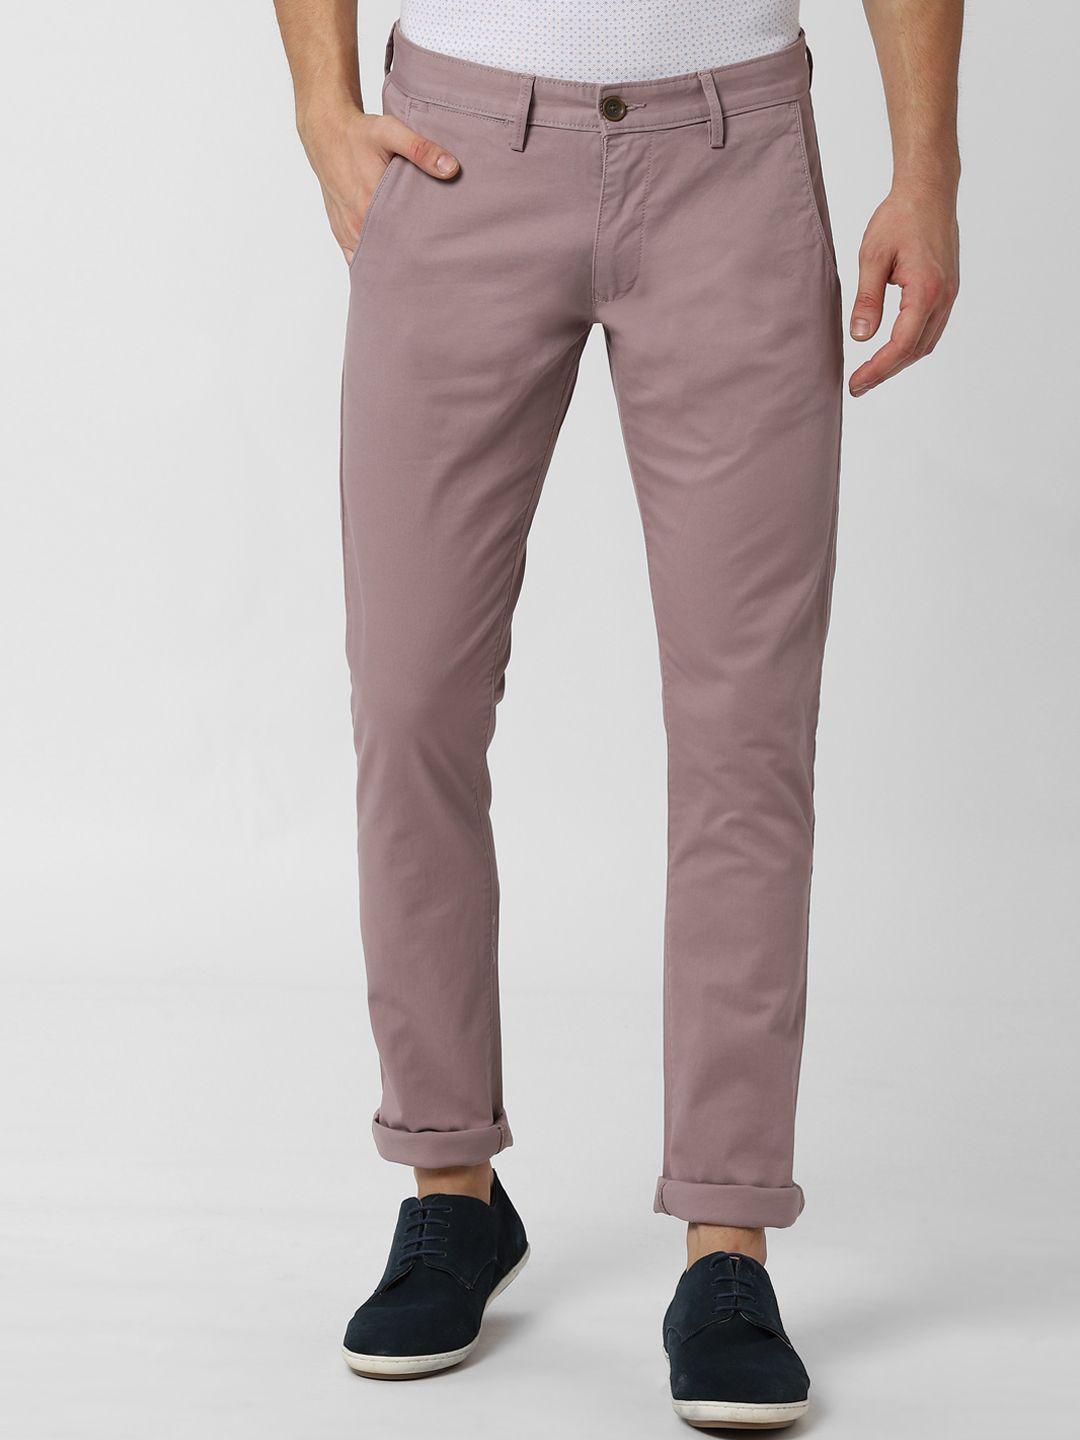 peter england casuals men pink skinny fit solid regular trousers